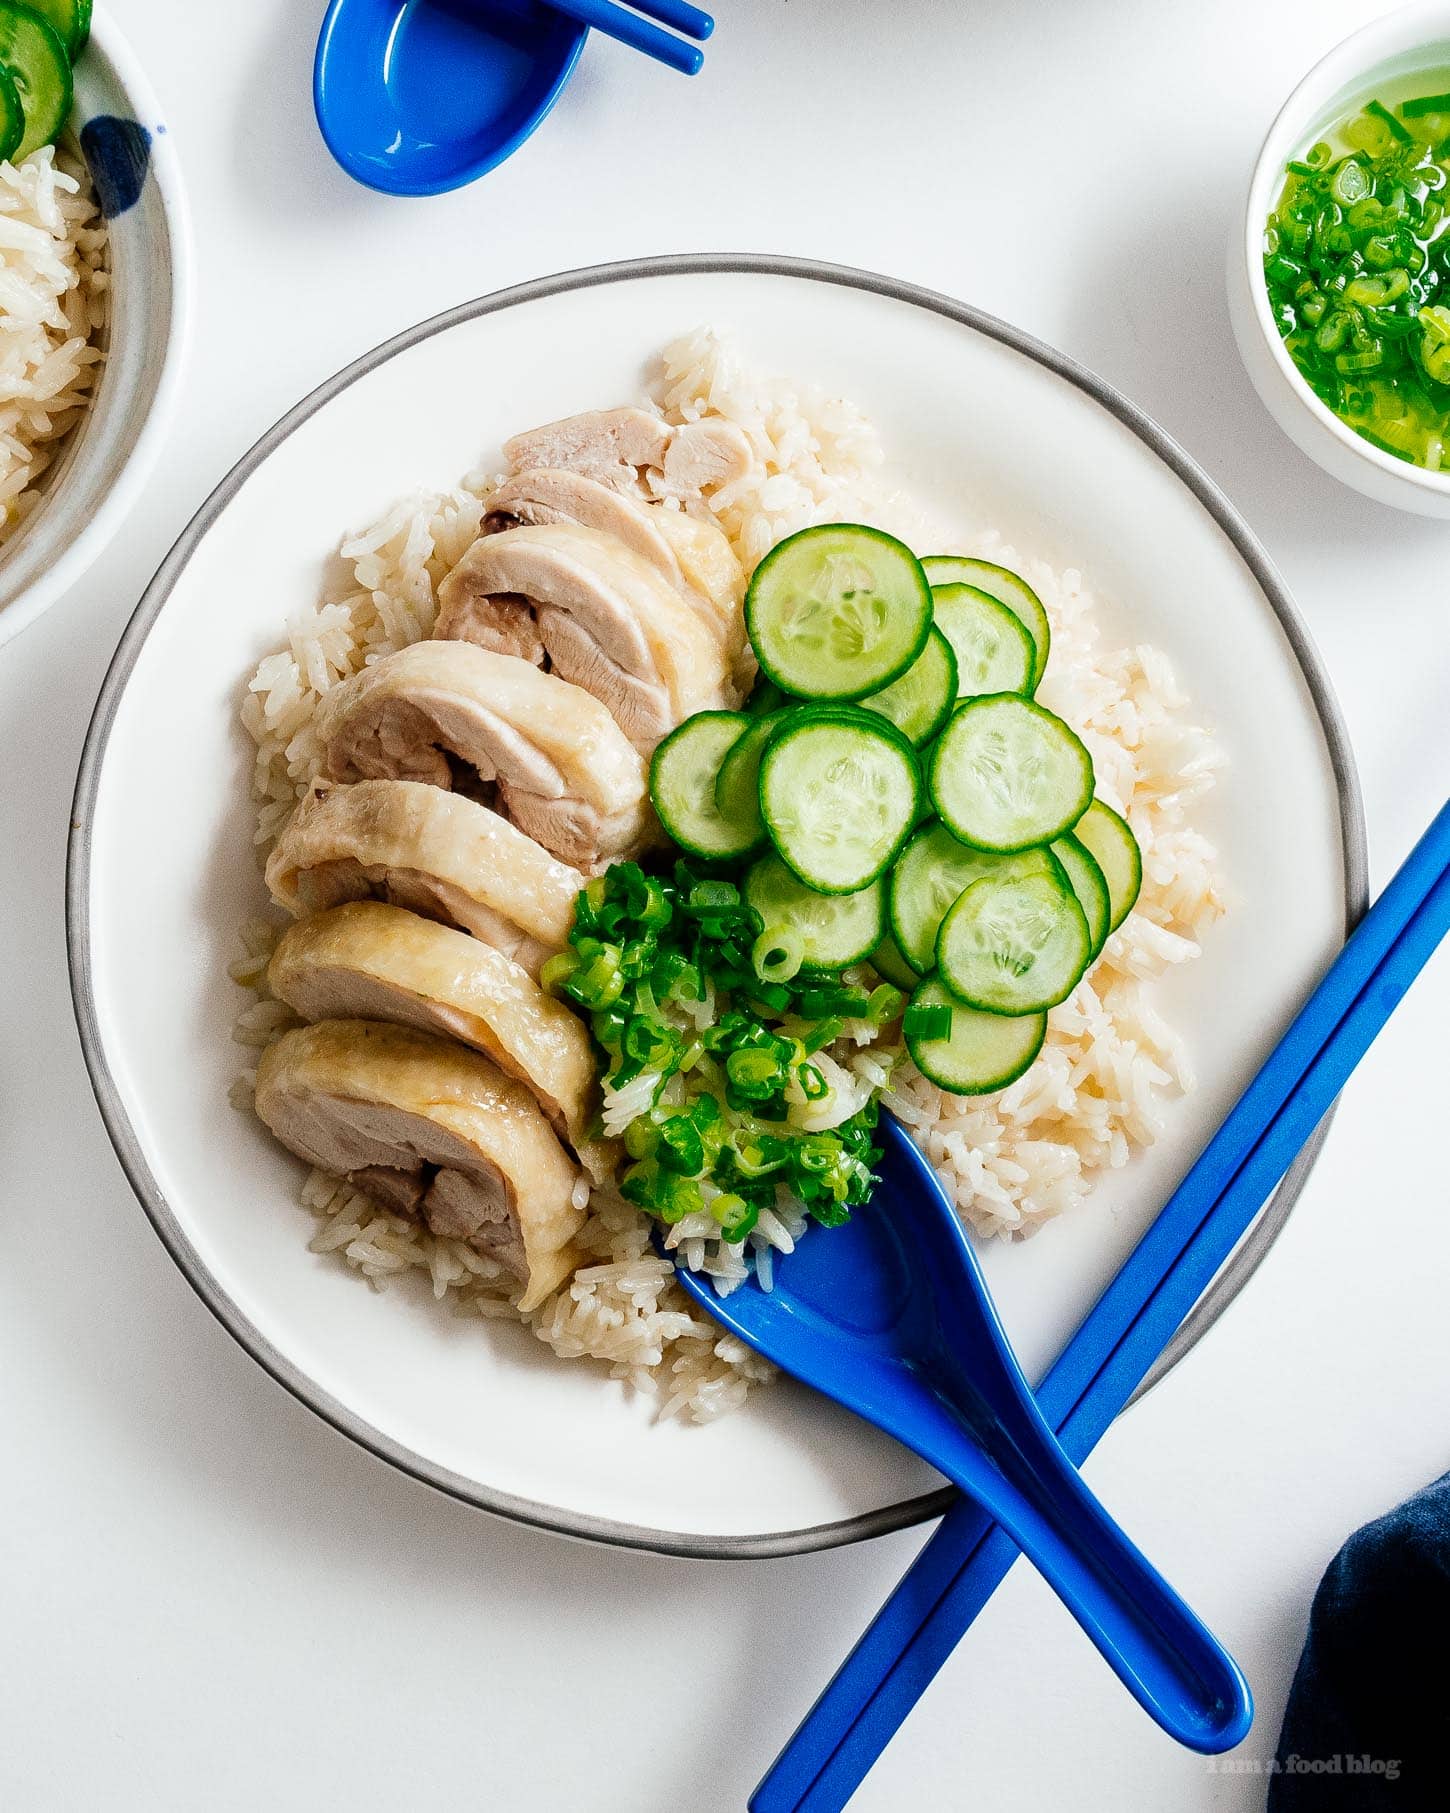 Super simple and satisfying Hainanese chicken rice: juicy steamed chicken and ginger garlic rice cooked in the same pot. It’s what you want for dinner, right now! #hainanesechickenrice #chickenrice #recipes #dinner #onepot #easy #chickenrecipe #rice #chickenandrice